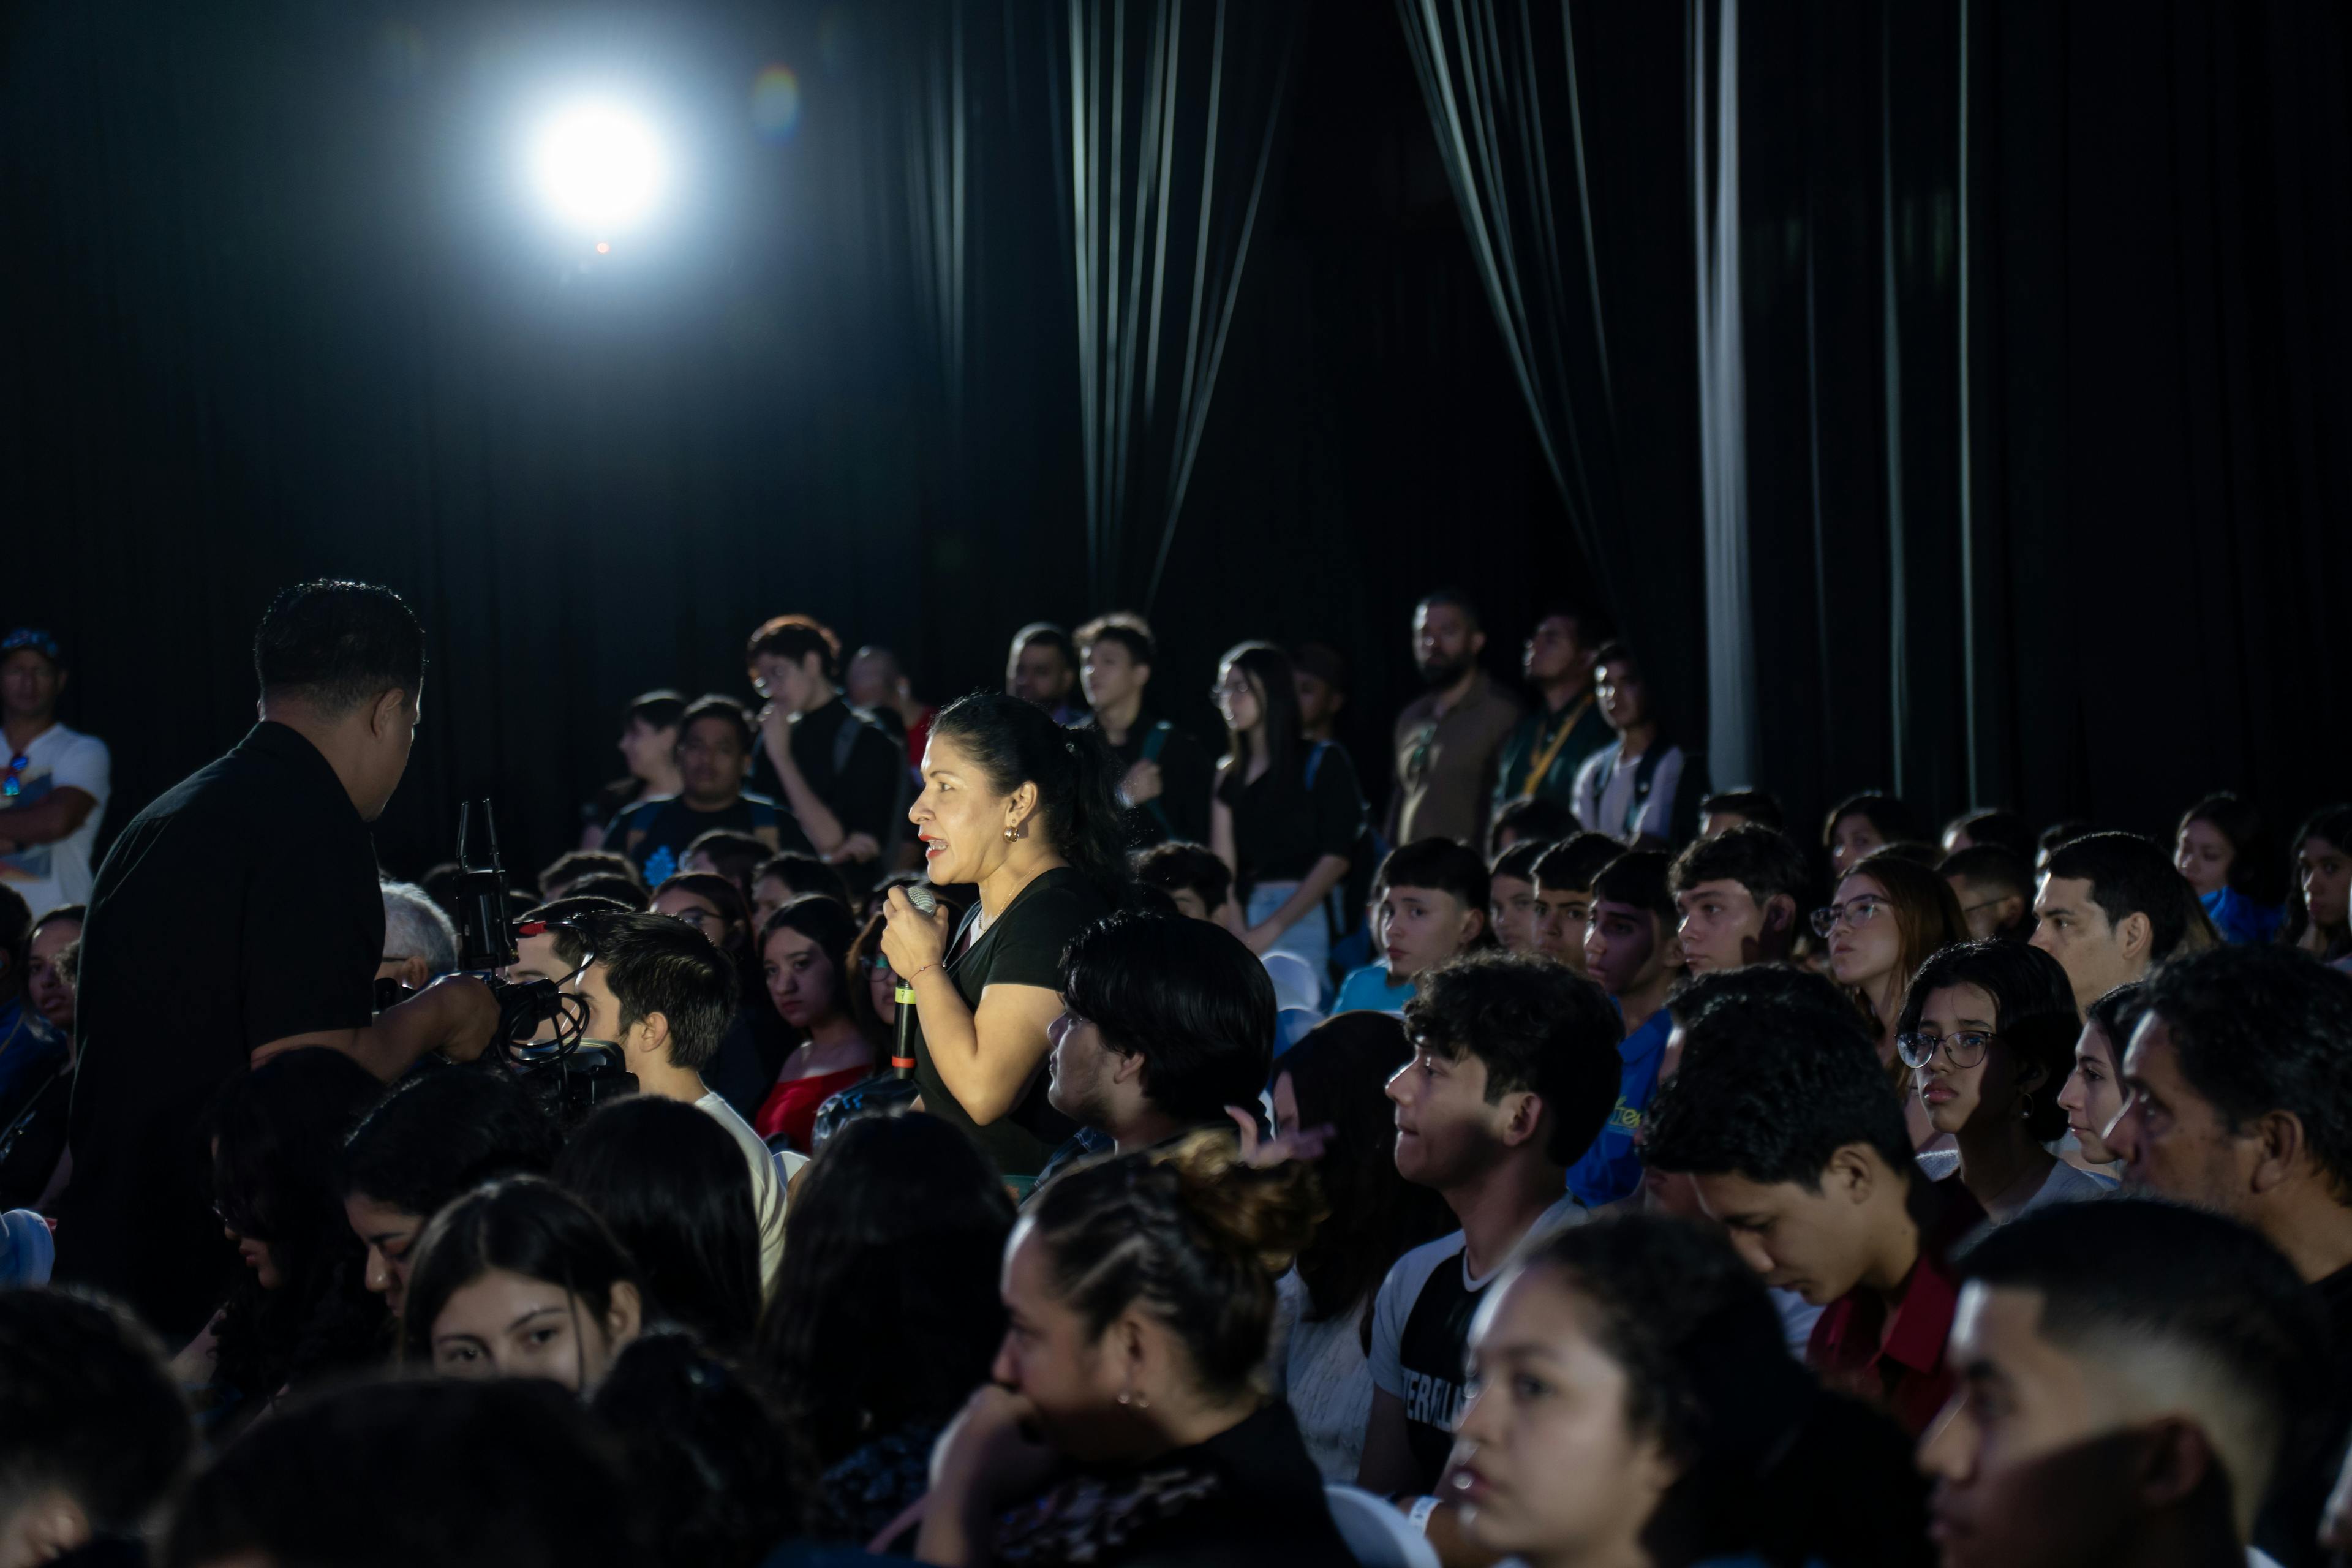 The percentage of women, adolescents and girls at the event was the highest of all editions of ETH Latam.